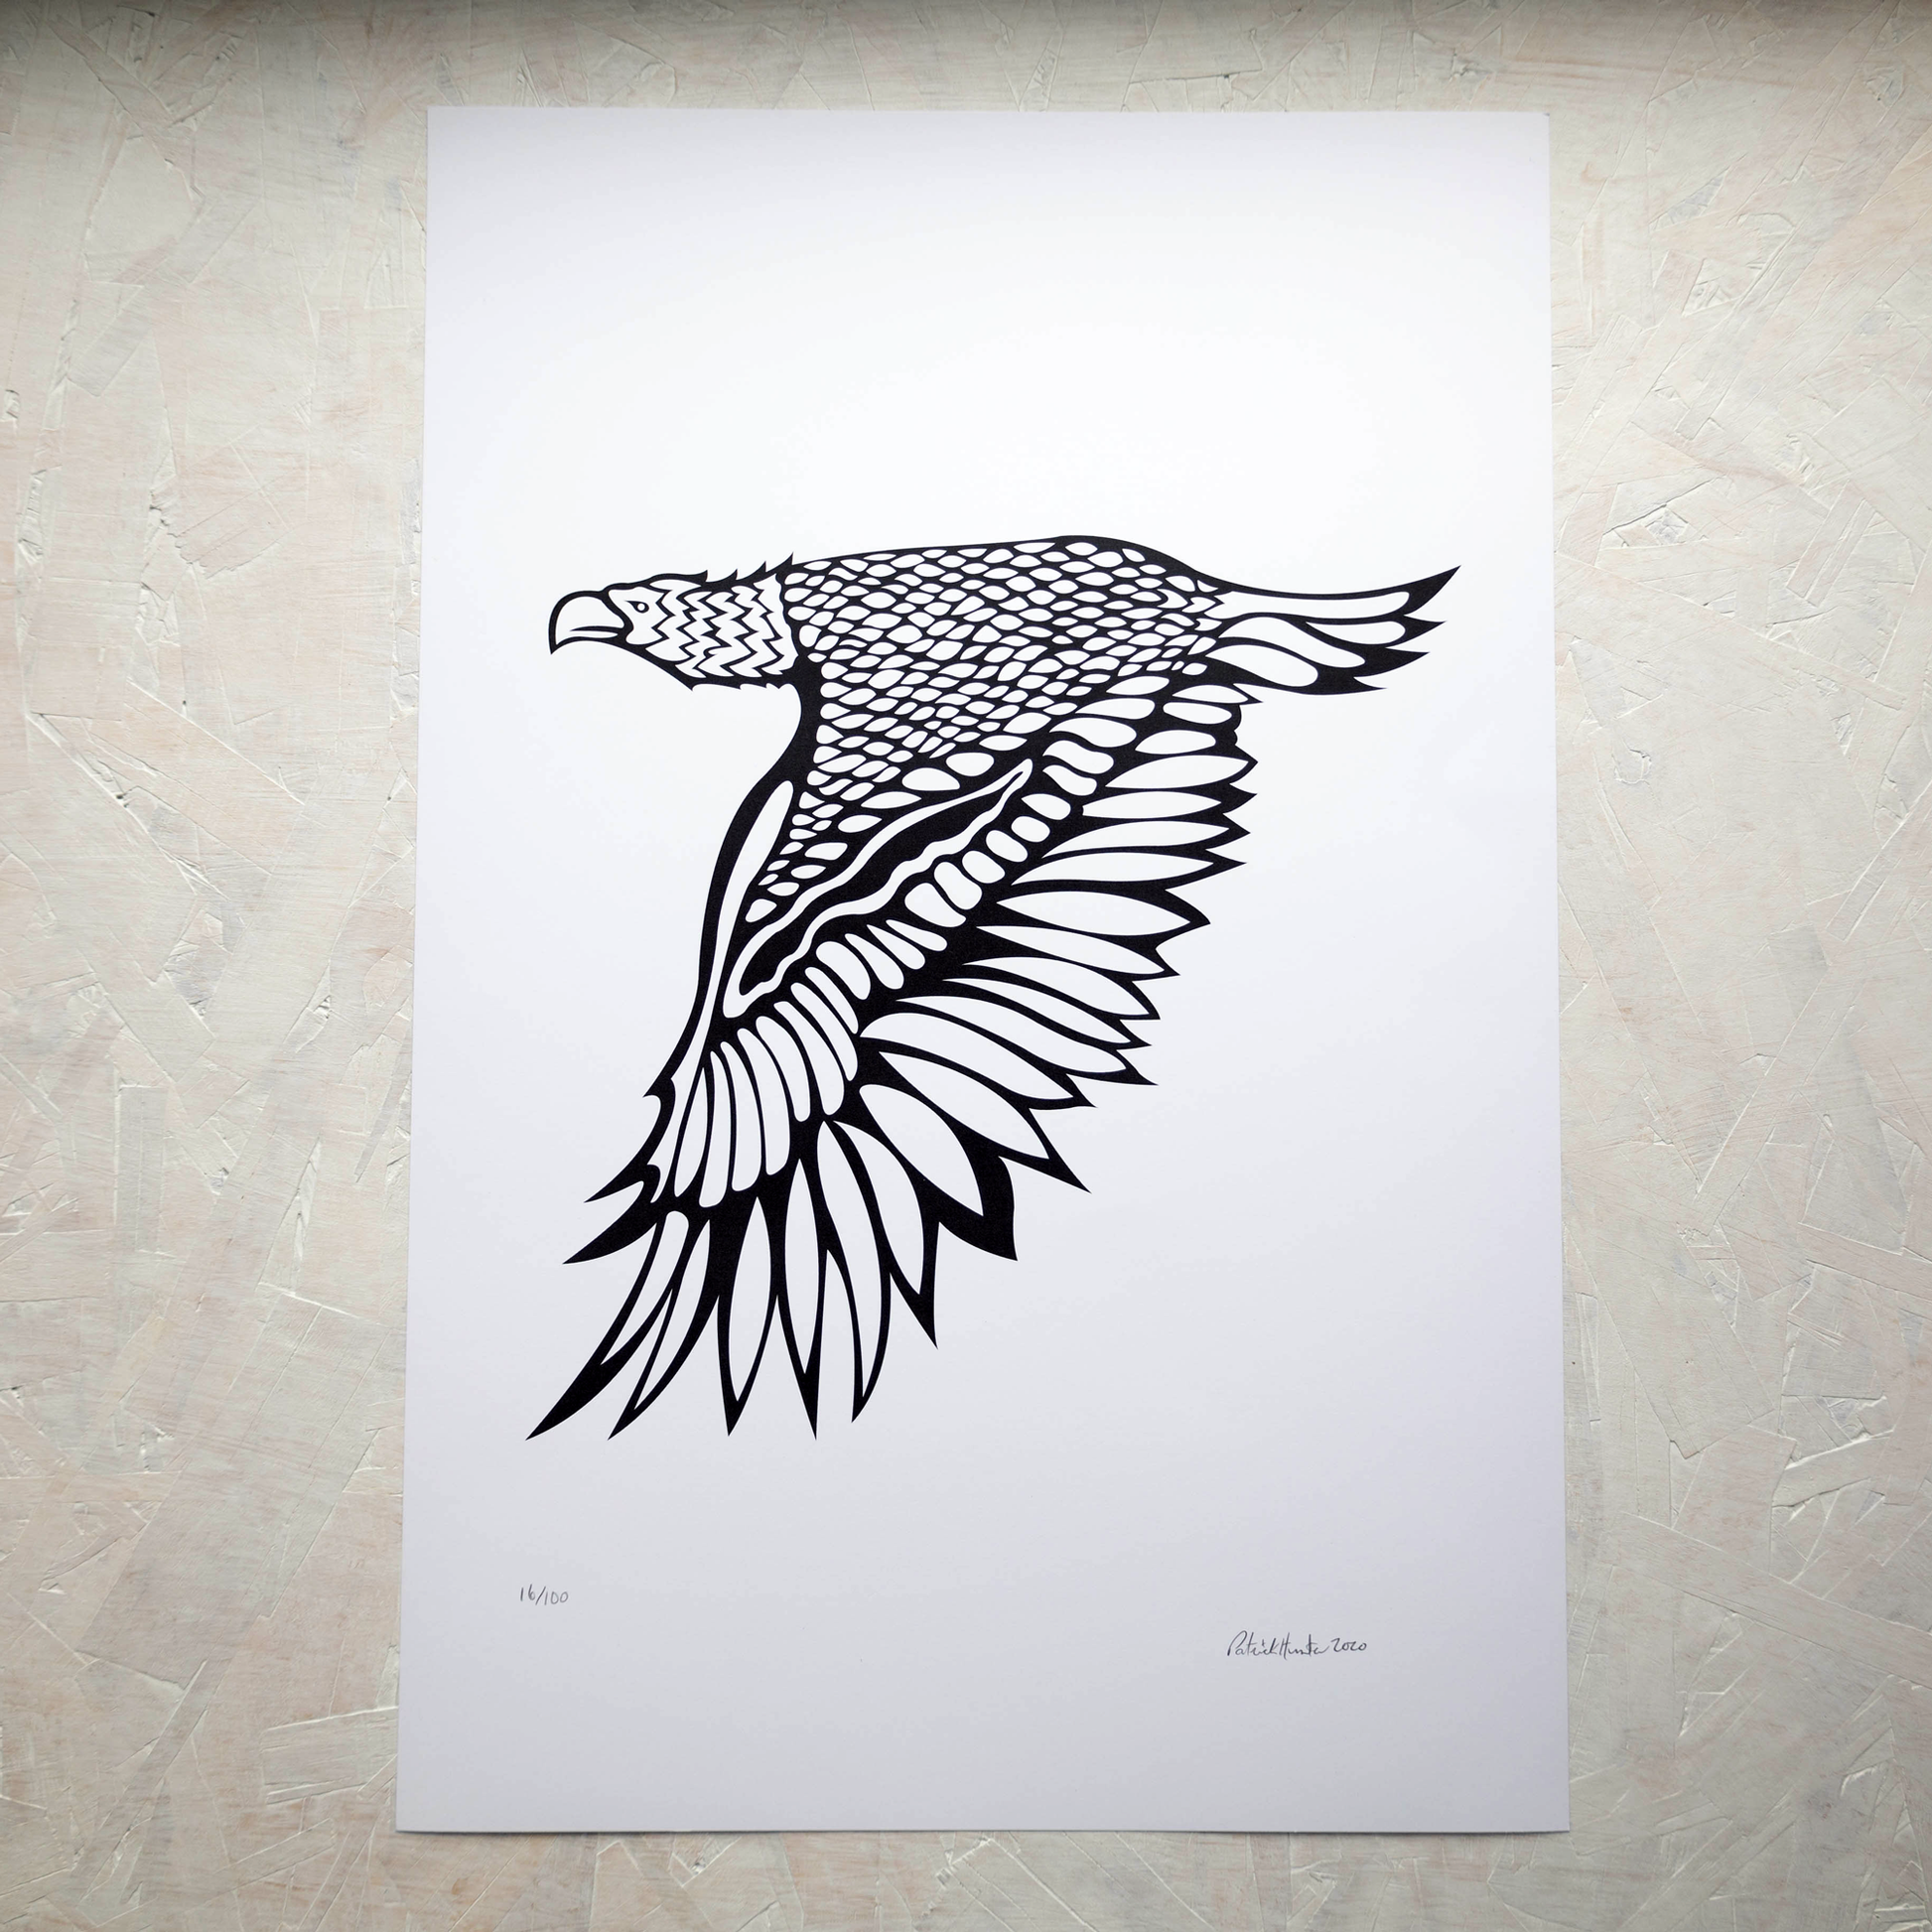 Print of Patrick Hunter's painting of an eagle in flight in black and white, woodland art style.